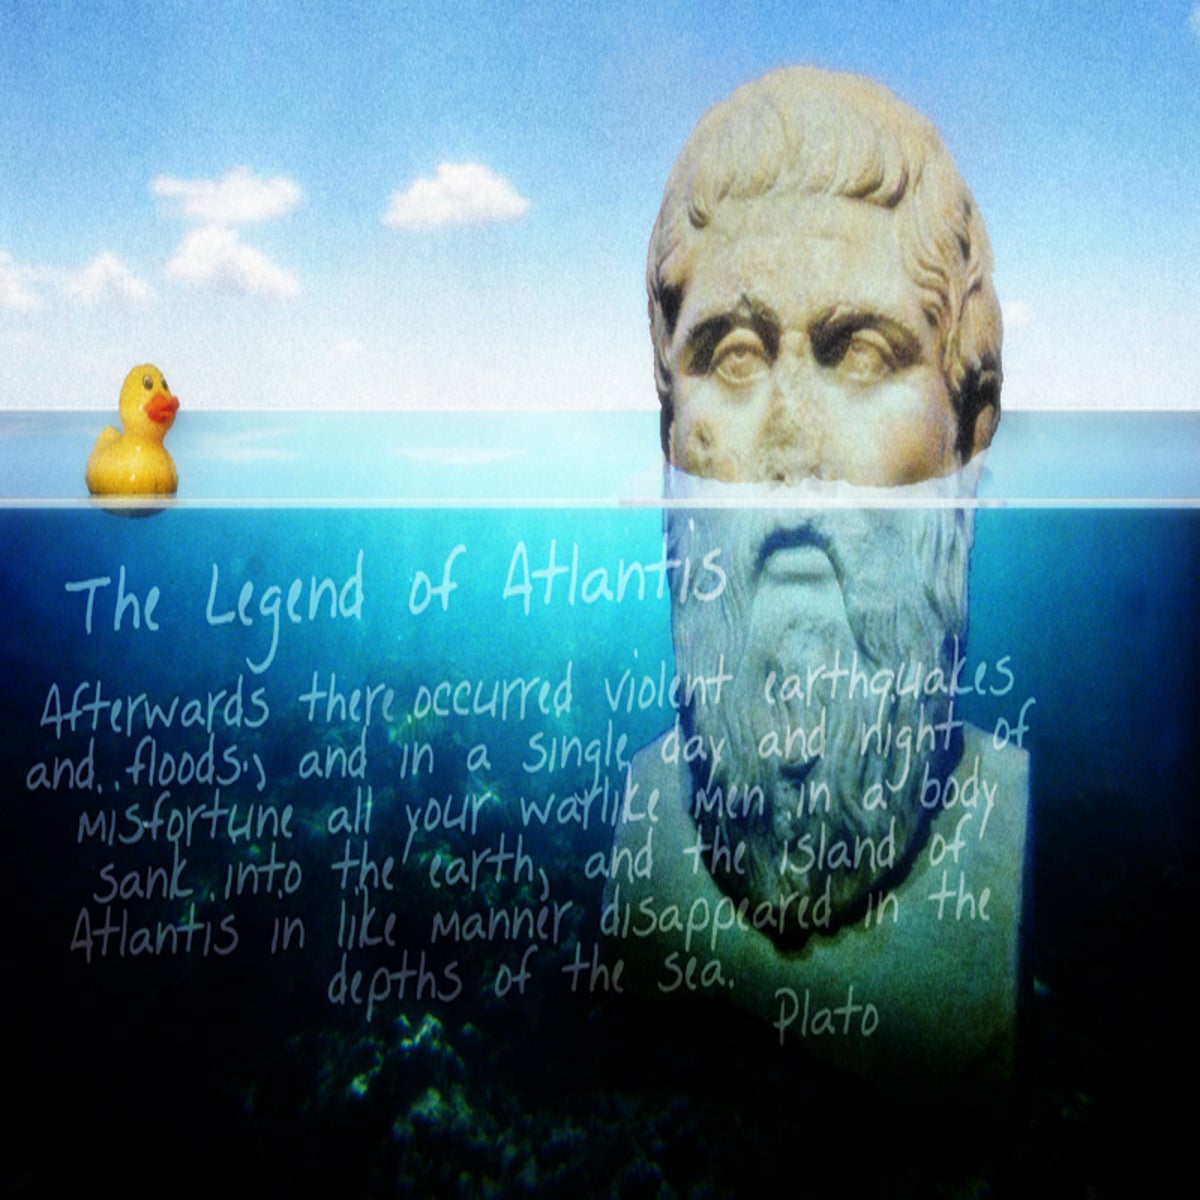 Atlantis – The story behind the legend